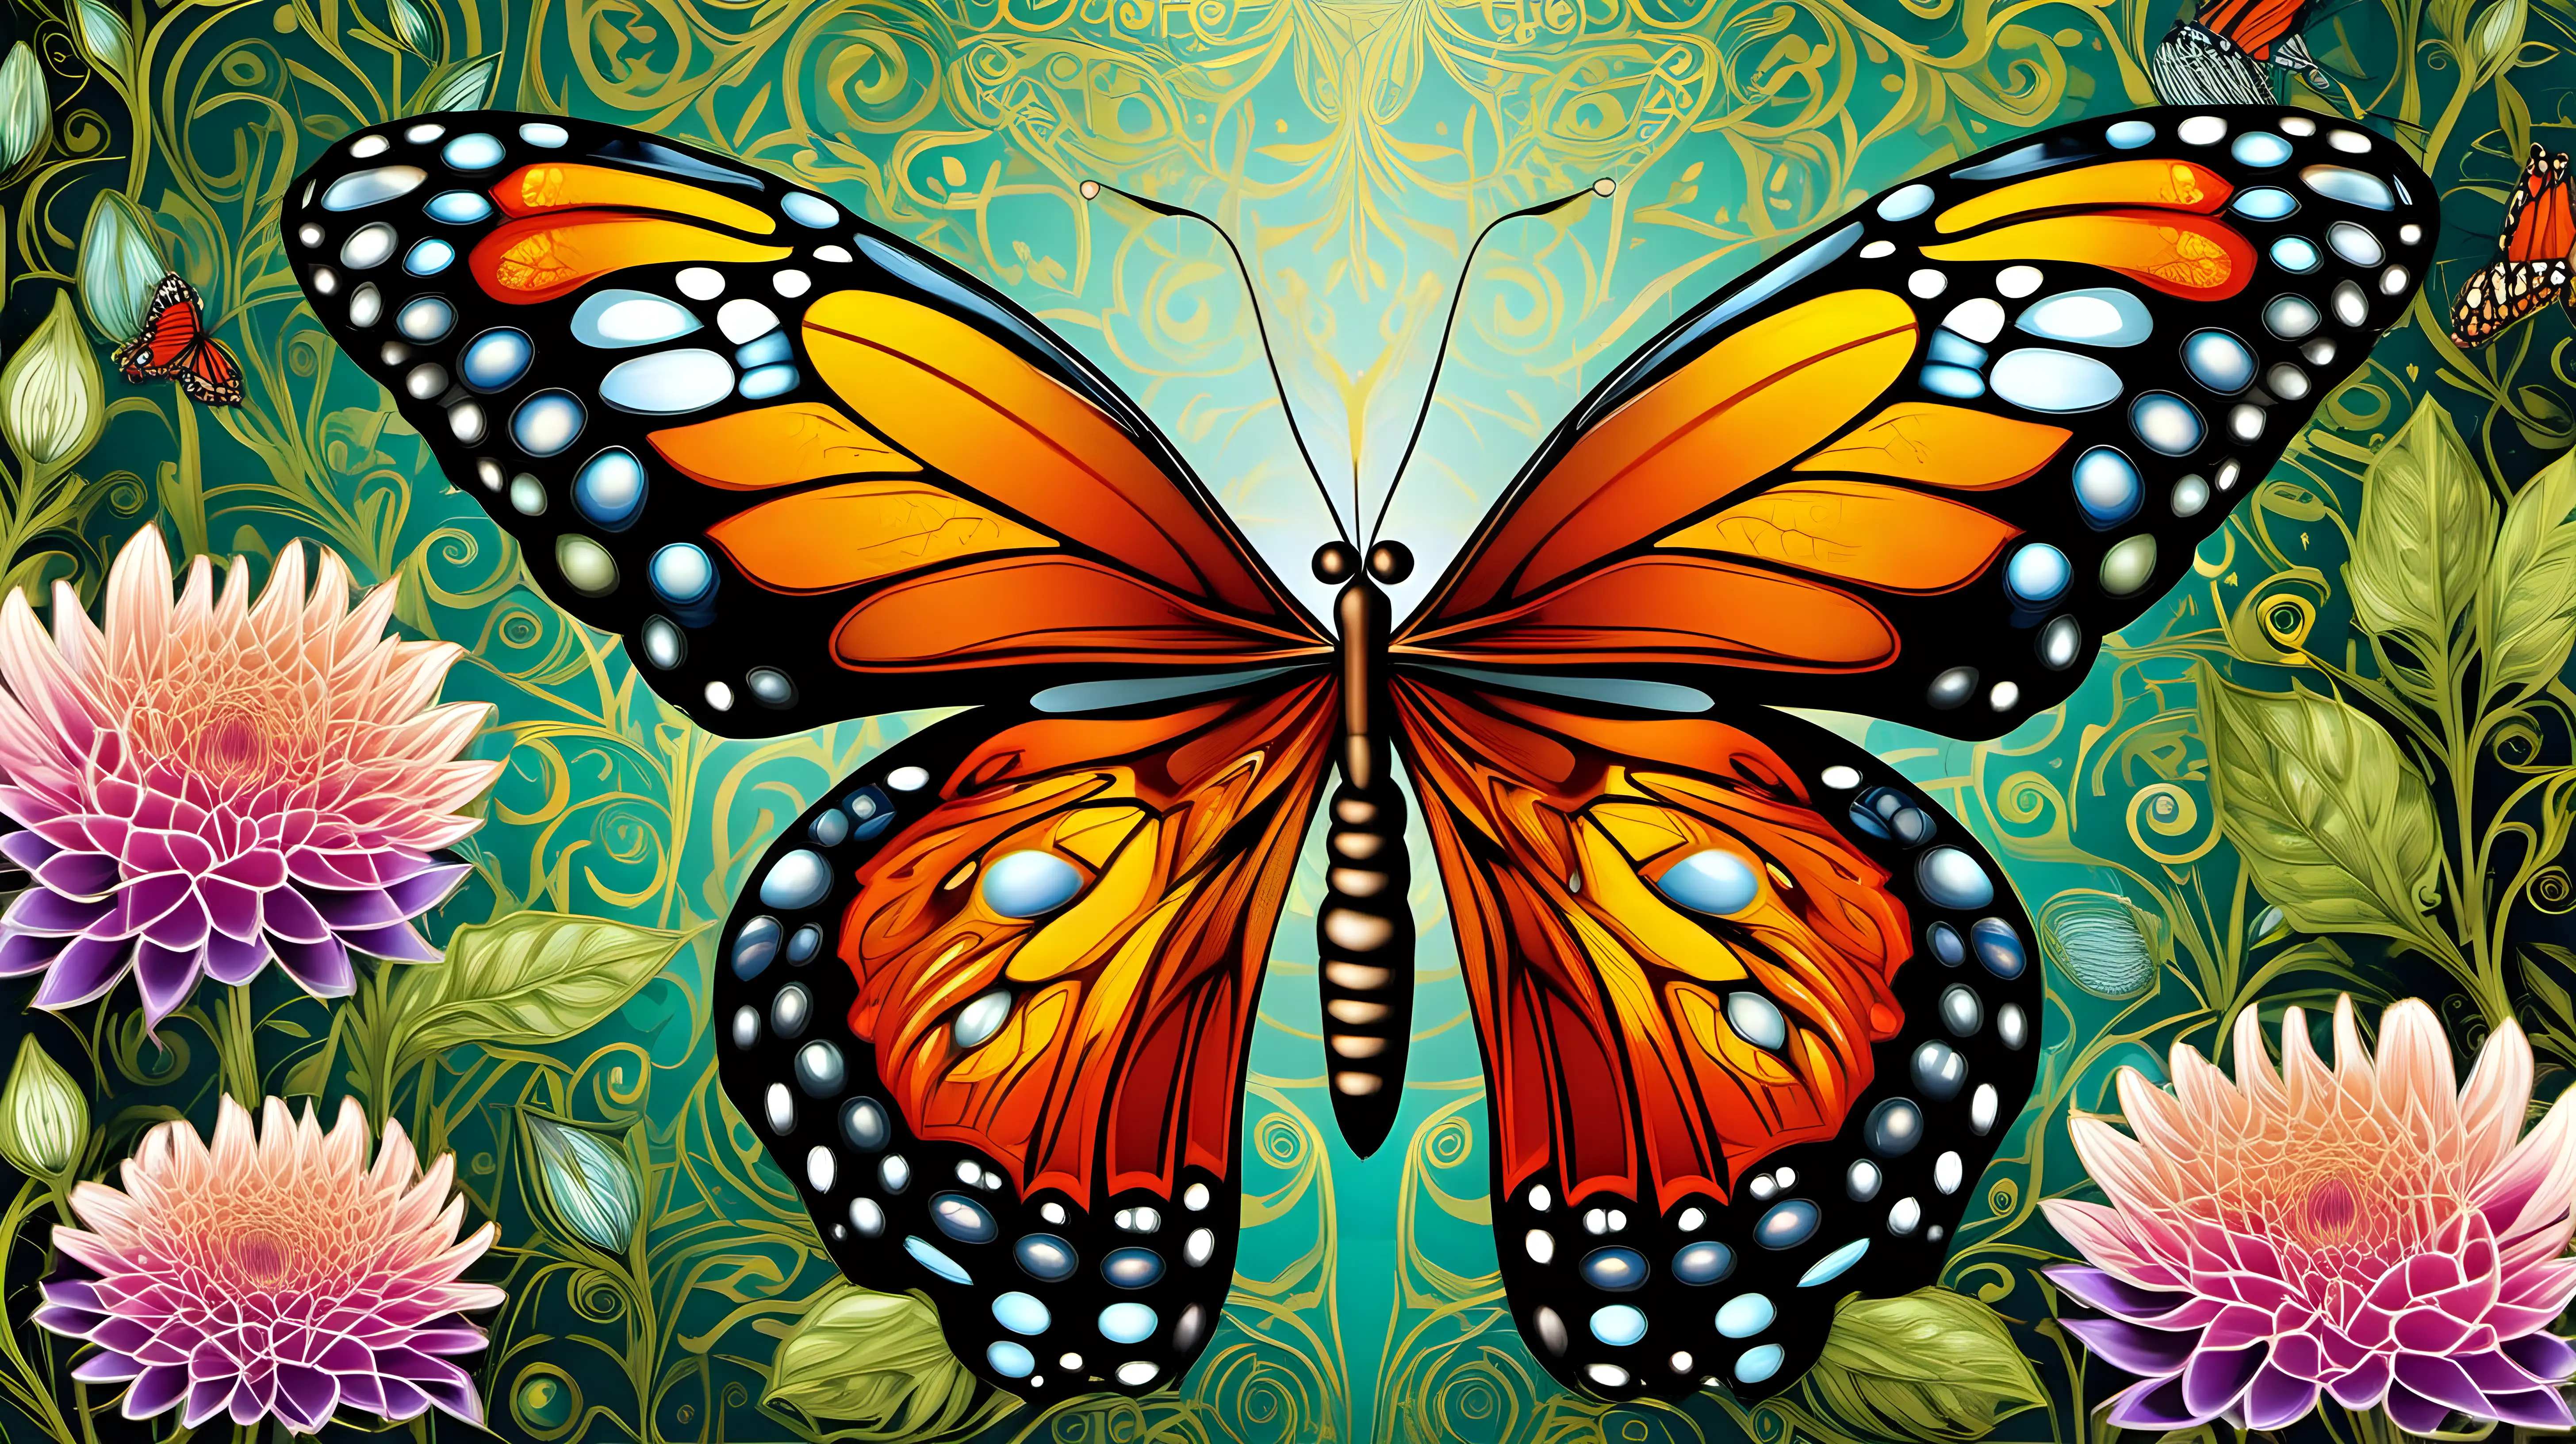 Create a breathtakingly detailed abstract image of a butterfly that showcases its intricate patterns, vibrant colors, and delicate wings. Pay close attention to the fine details of its antennae, body, and wing veins. Capture the butterfly in a natural setting, surrounded by lush foliage or blooming flowers, to emphasize its natural beauty and grace. Your goal is to produce an image that exudes the wonder and elegance of these magnificent insects."